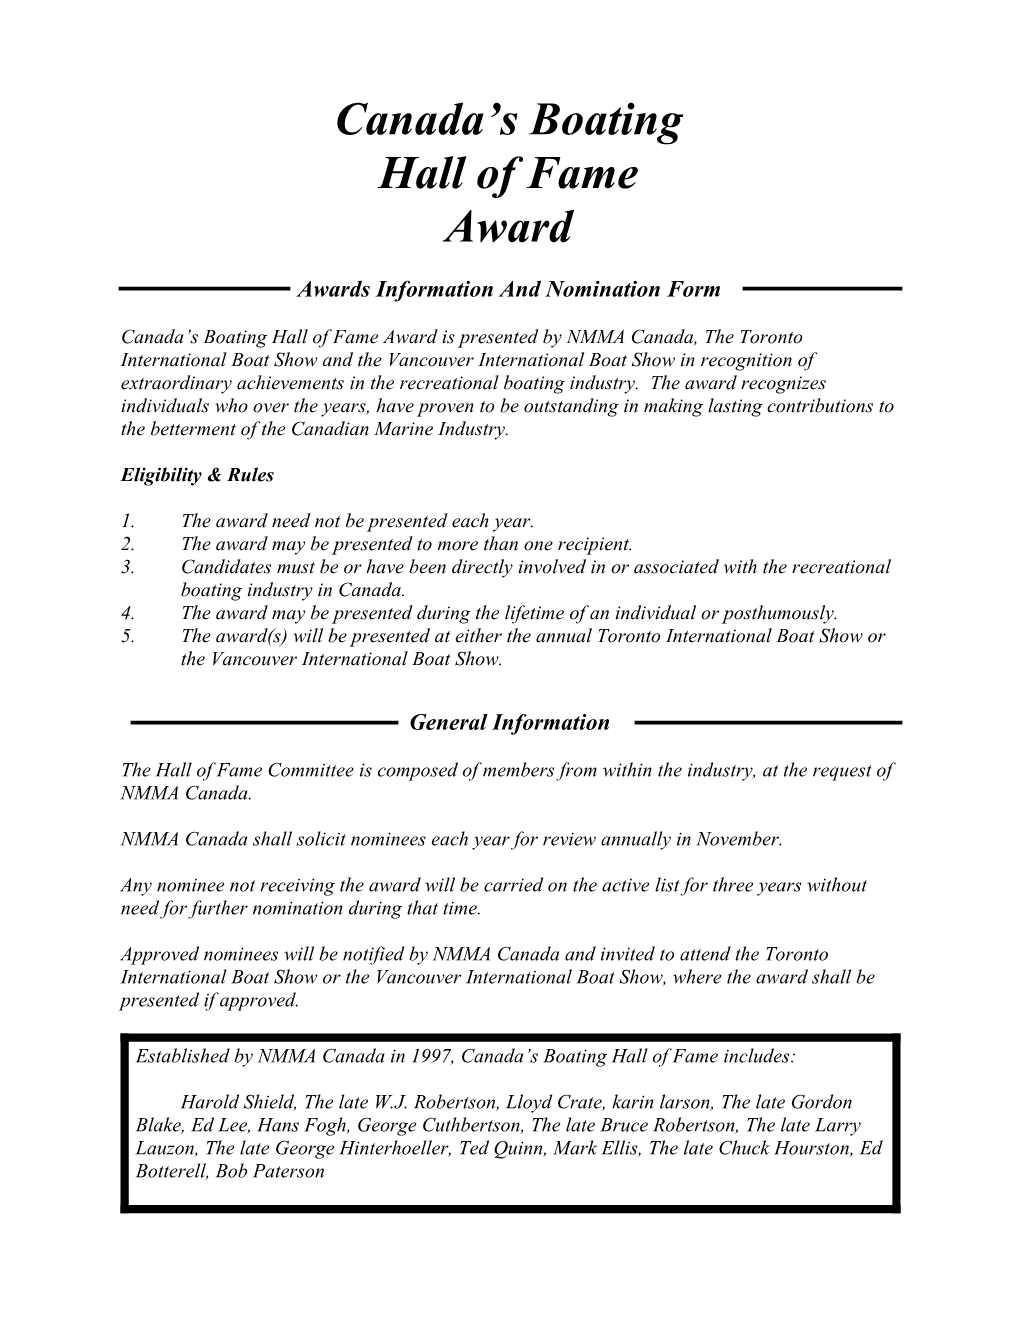 Awards Information and Nomination Form